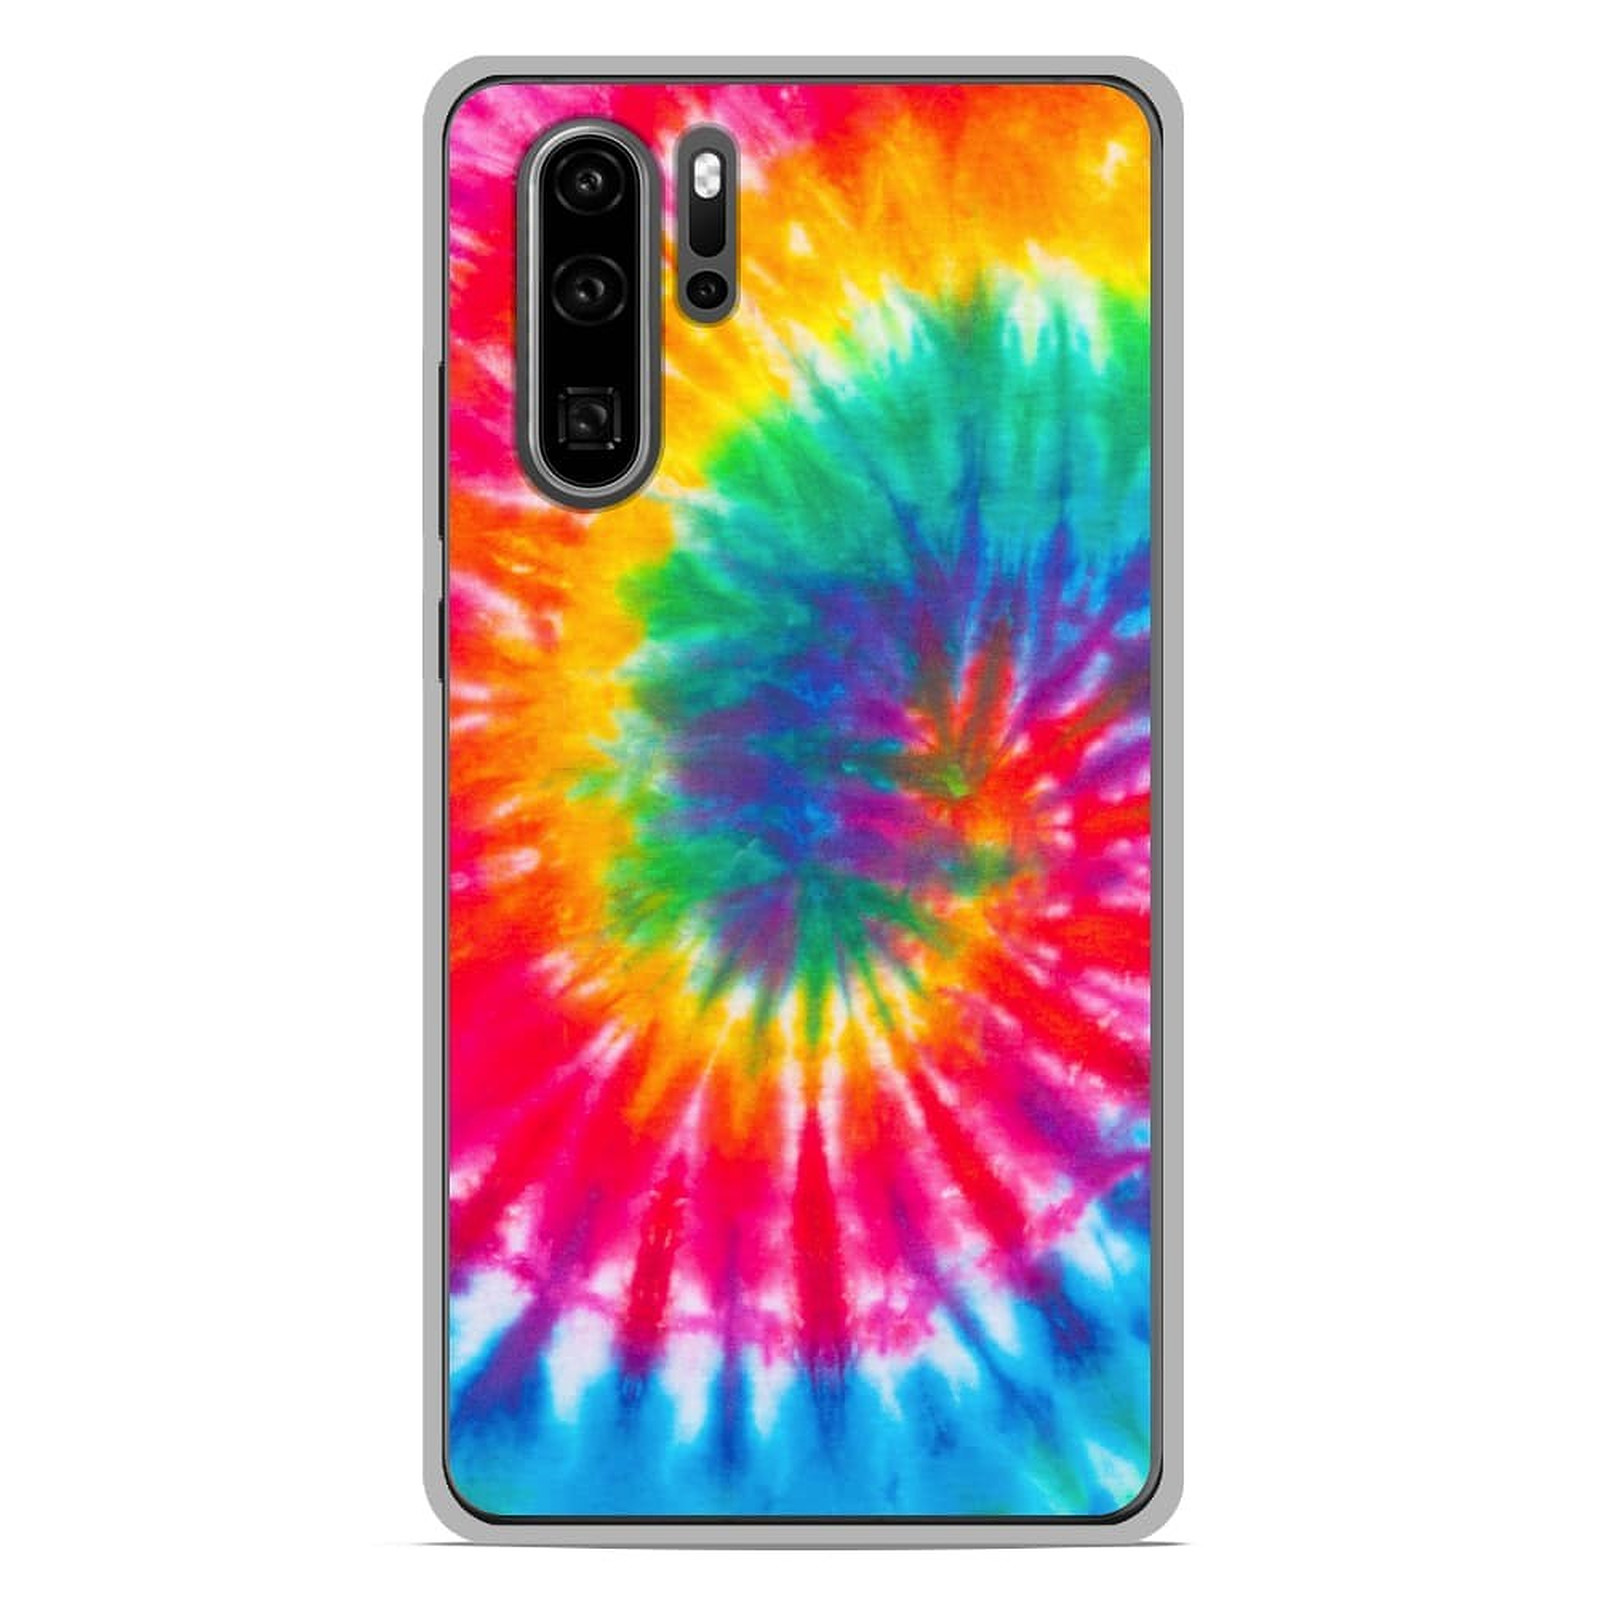 1001 Coques Coque silicone gel Huawei P30 Pro motif Tie Dye Spirale - Coque telephone 1001Coques